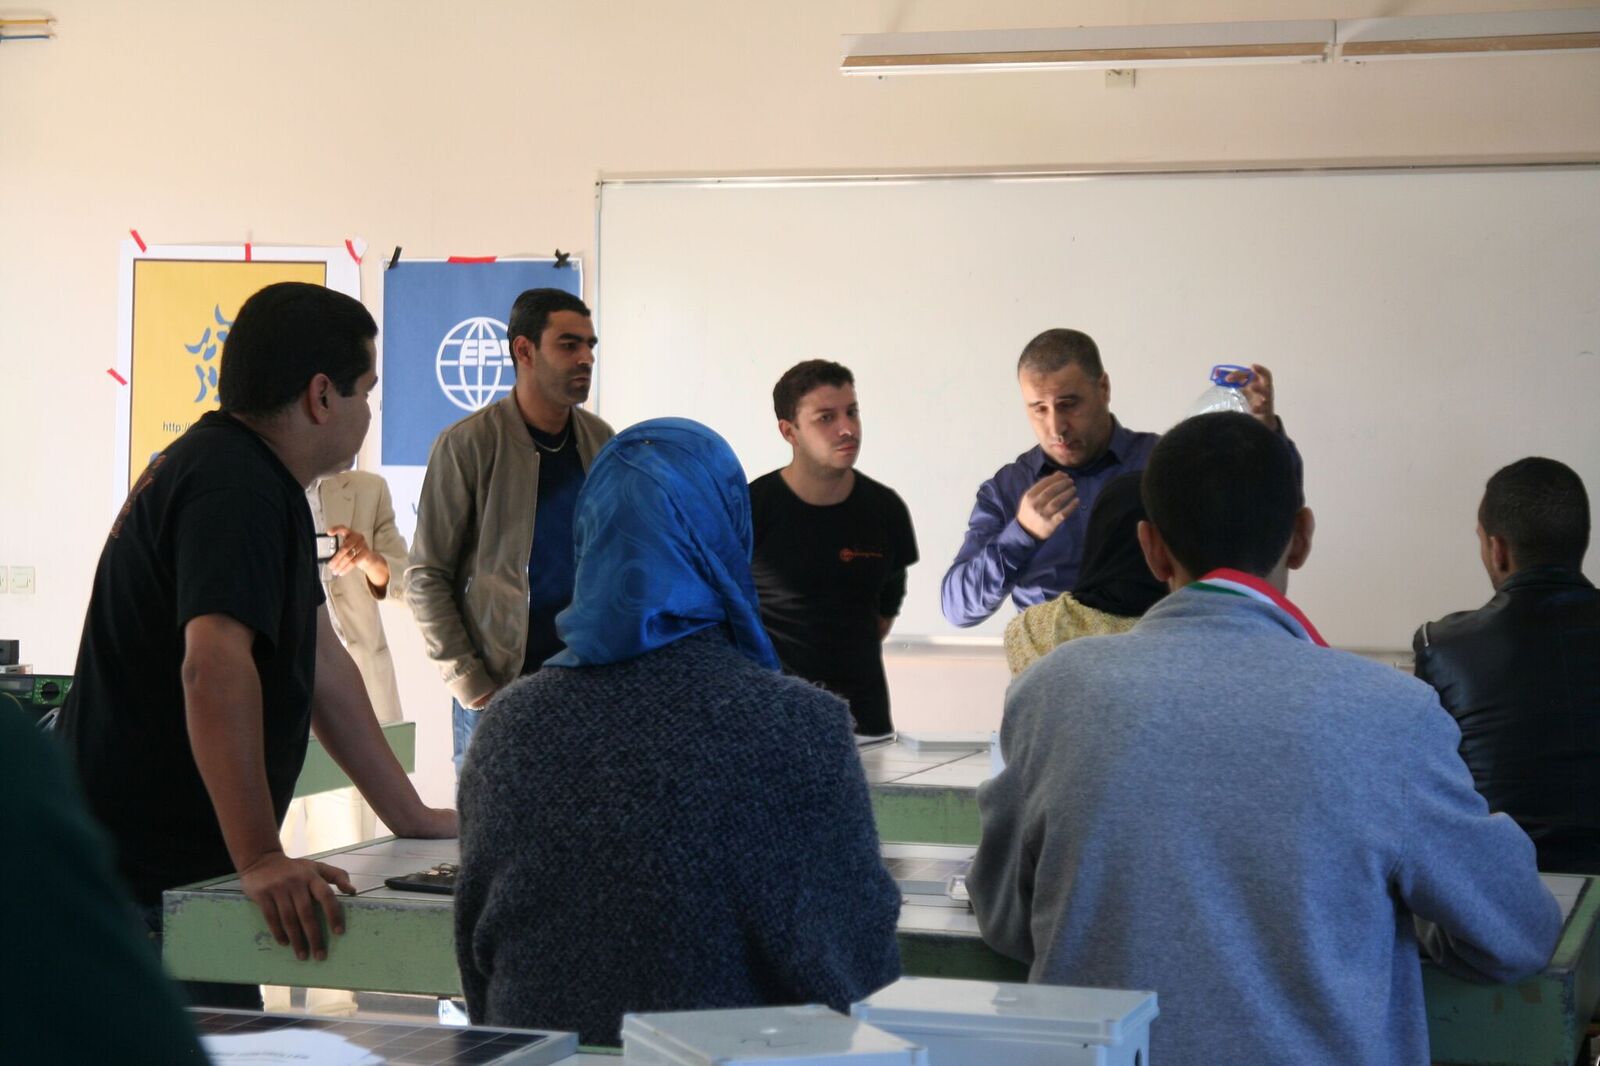 EPS IT manager & MCDA president Ahmed Ouarab presenting the solar kits to students